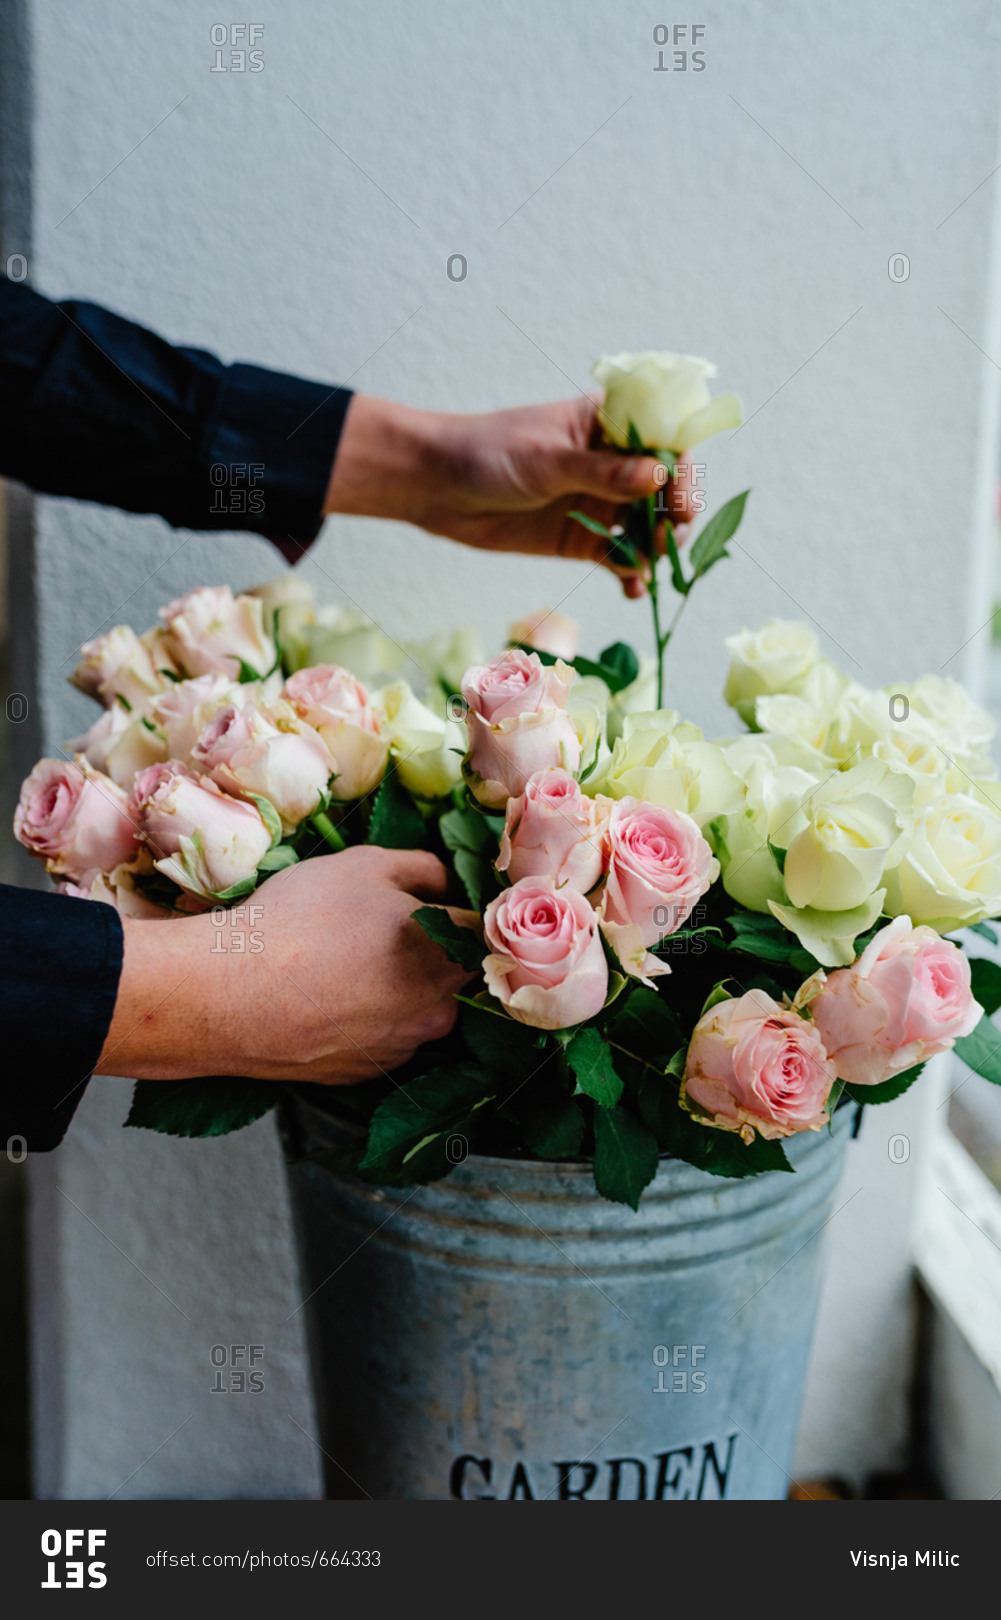 Hands selecting roses from big pile of beautiful roses placed in metal vase in flower shop